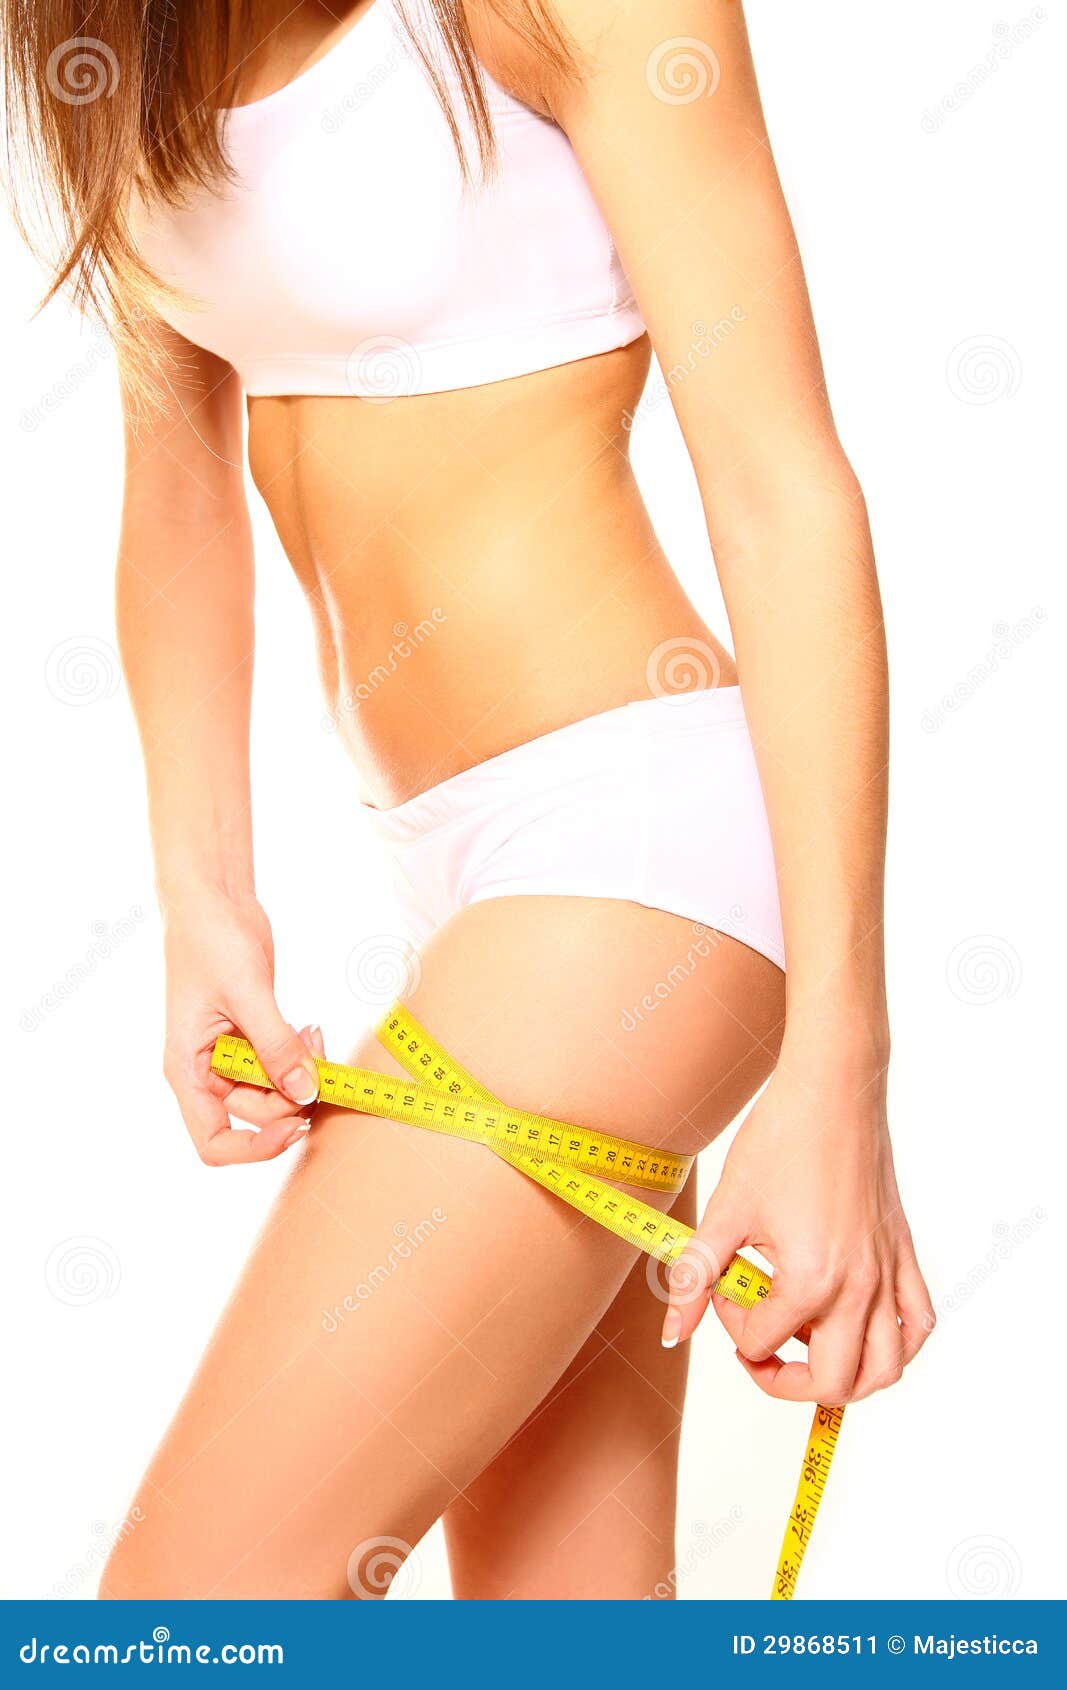 Premium Photo  Woman measuring thigh with yellow measuring tape. body  check. diet fitness concept.